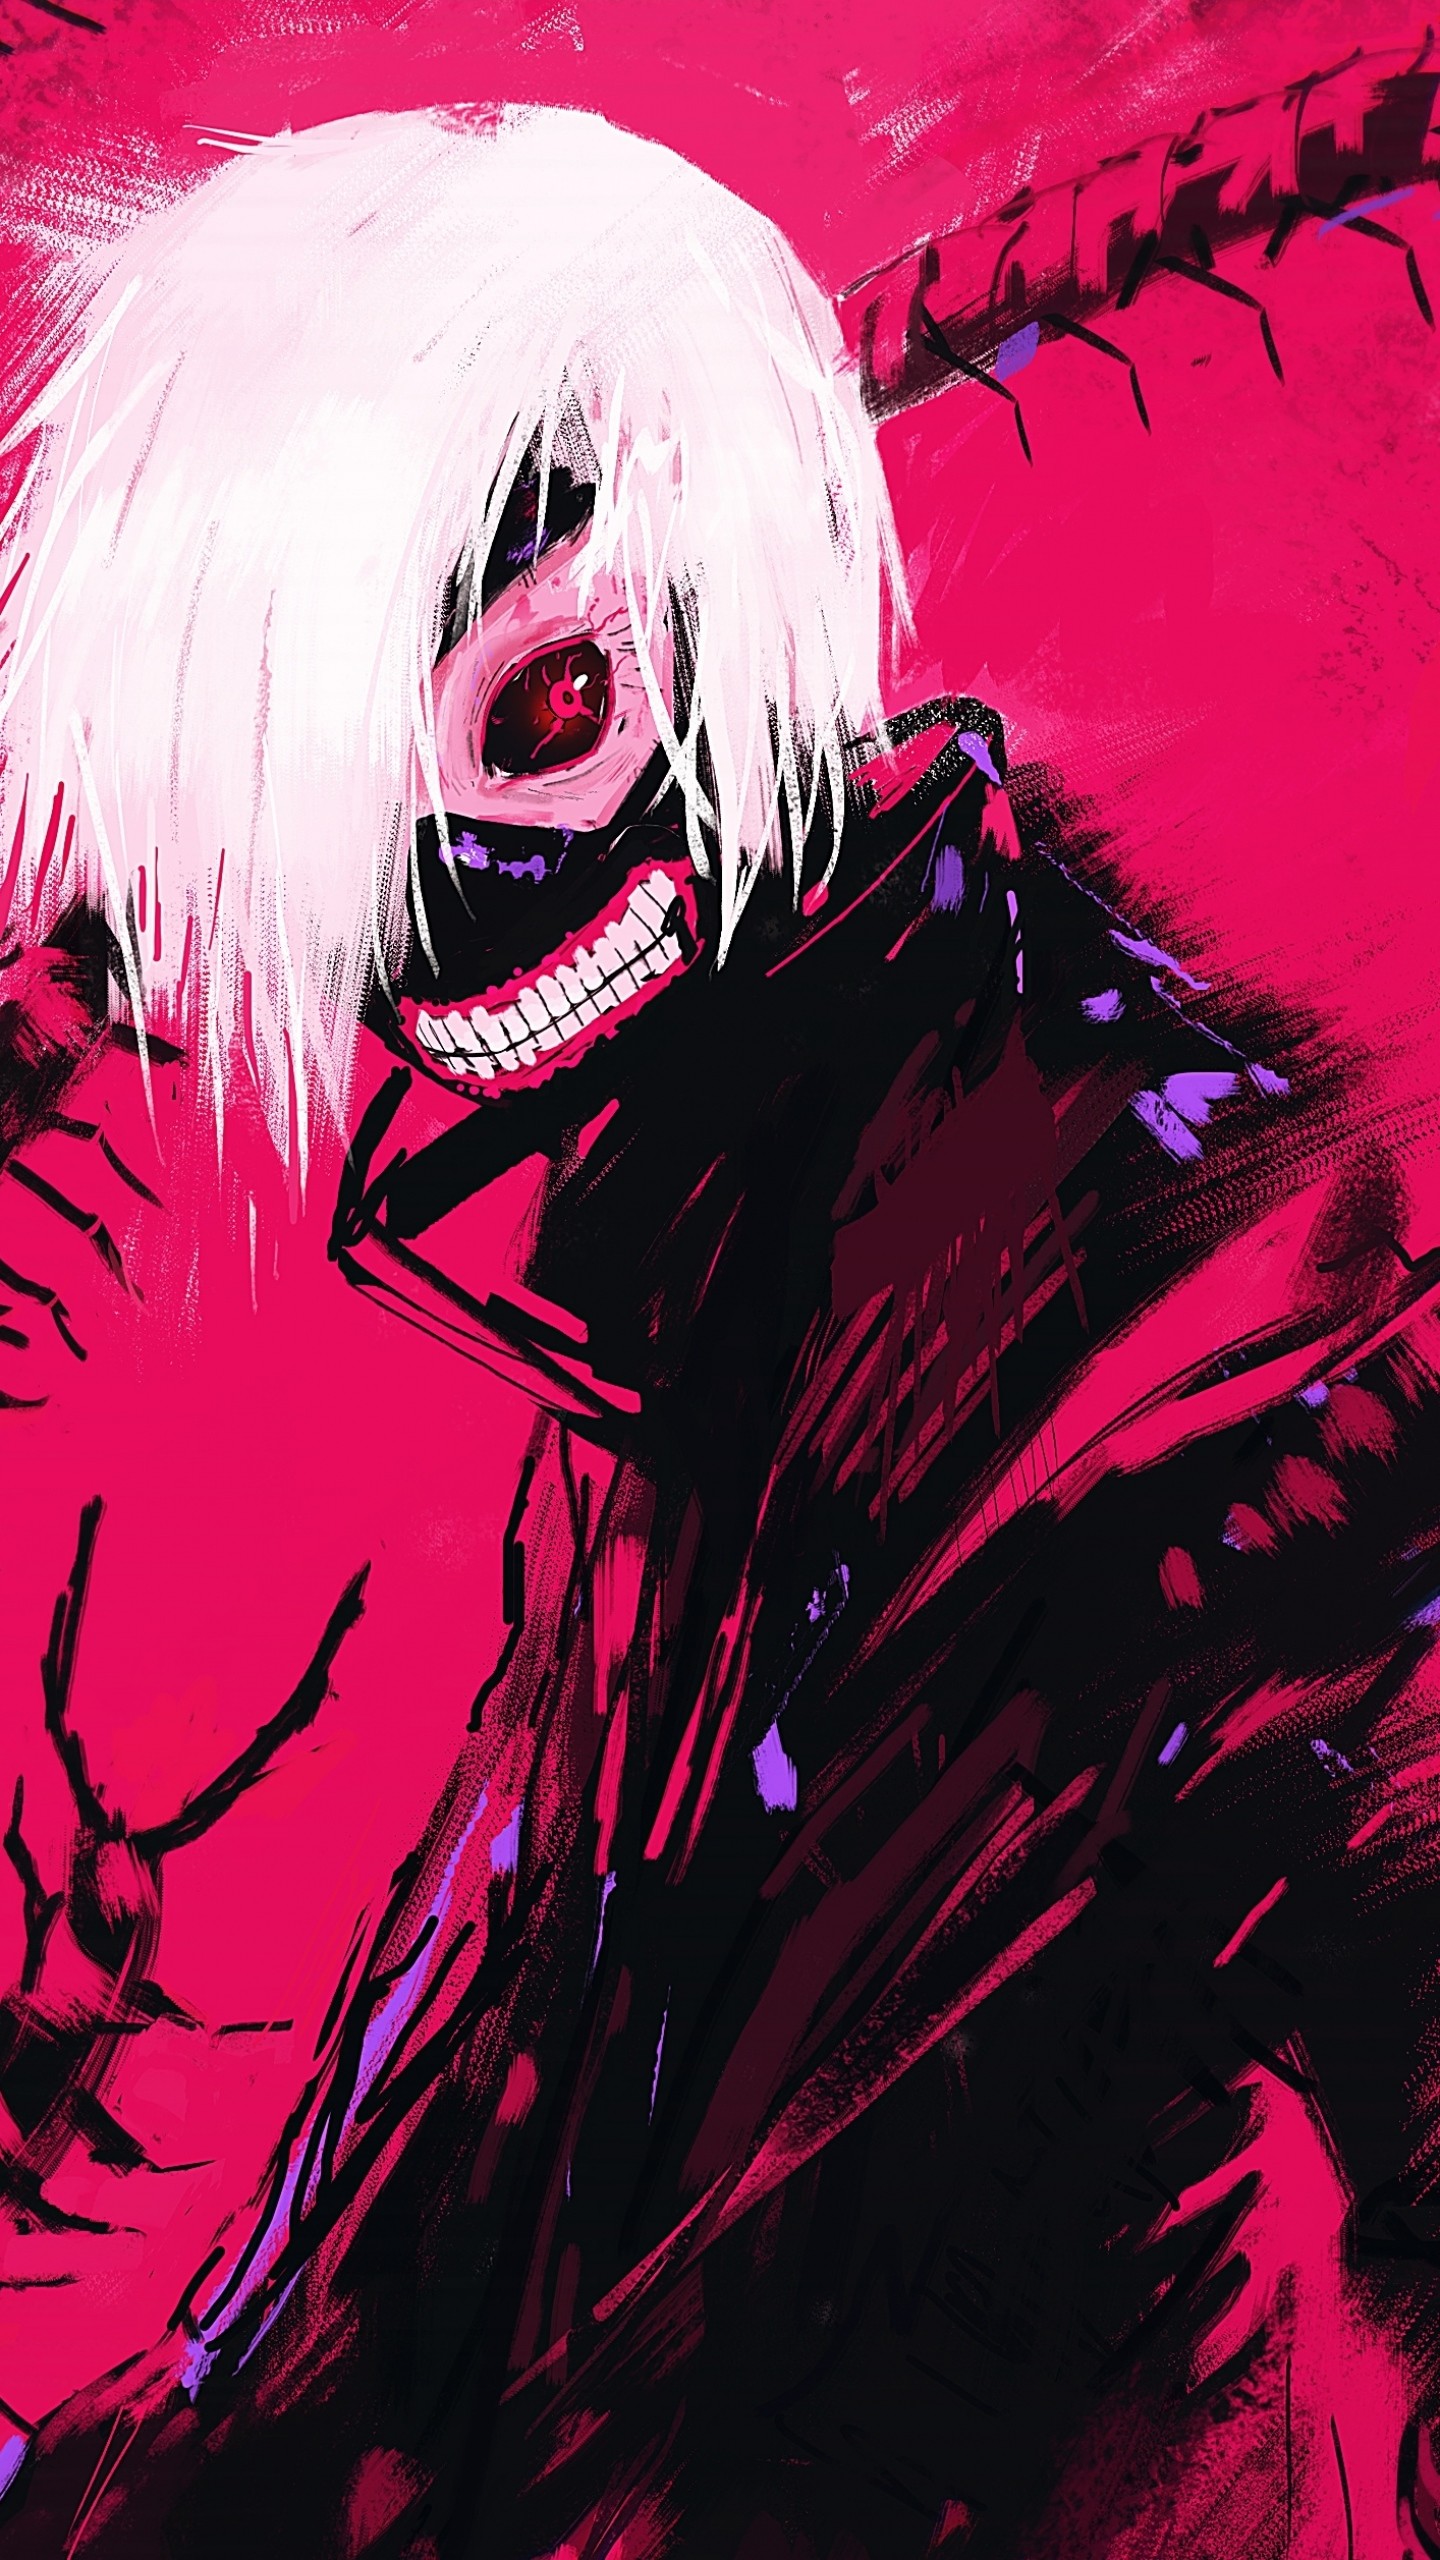 tokyo ghoul wallpaper 1080x1920,pink,anime,cartoon,fictional character,illustration